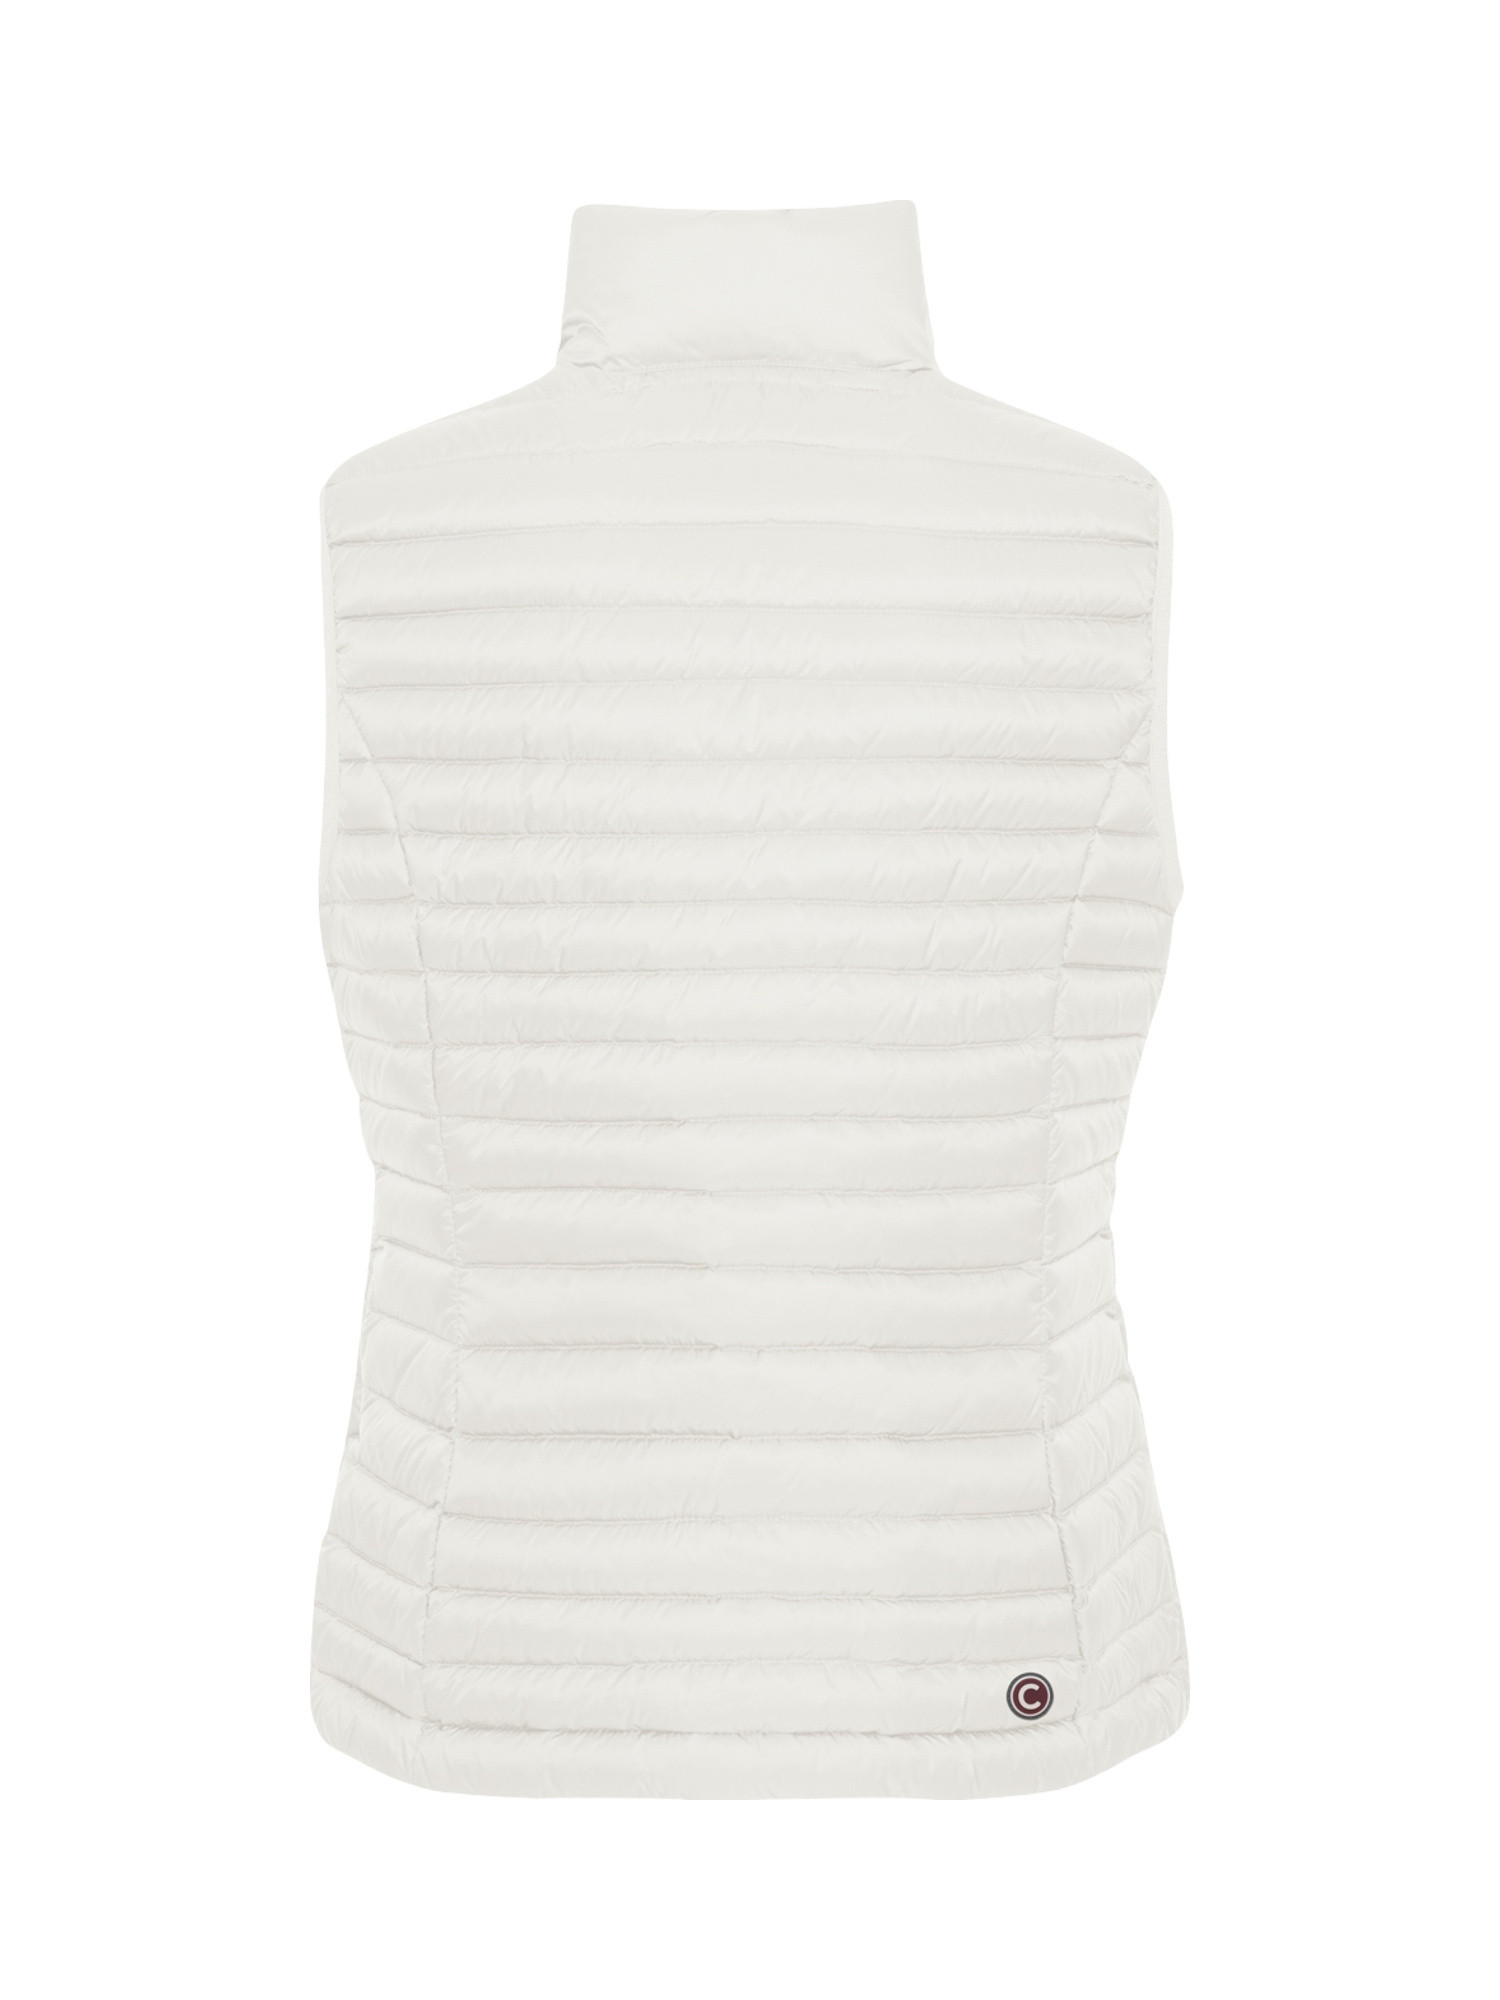 Colmar - Quilted gilet, White, large image number 1